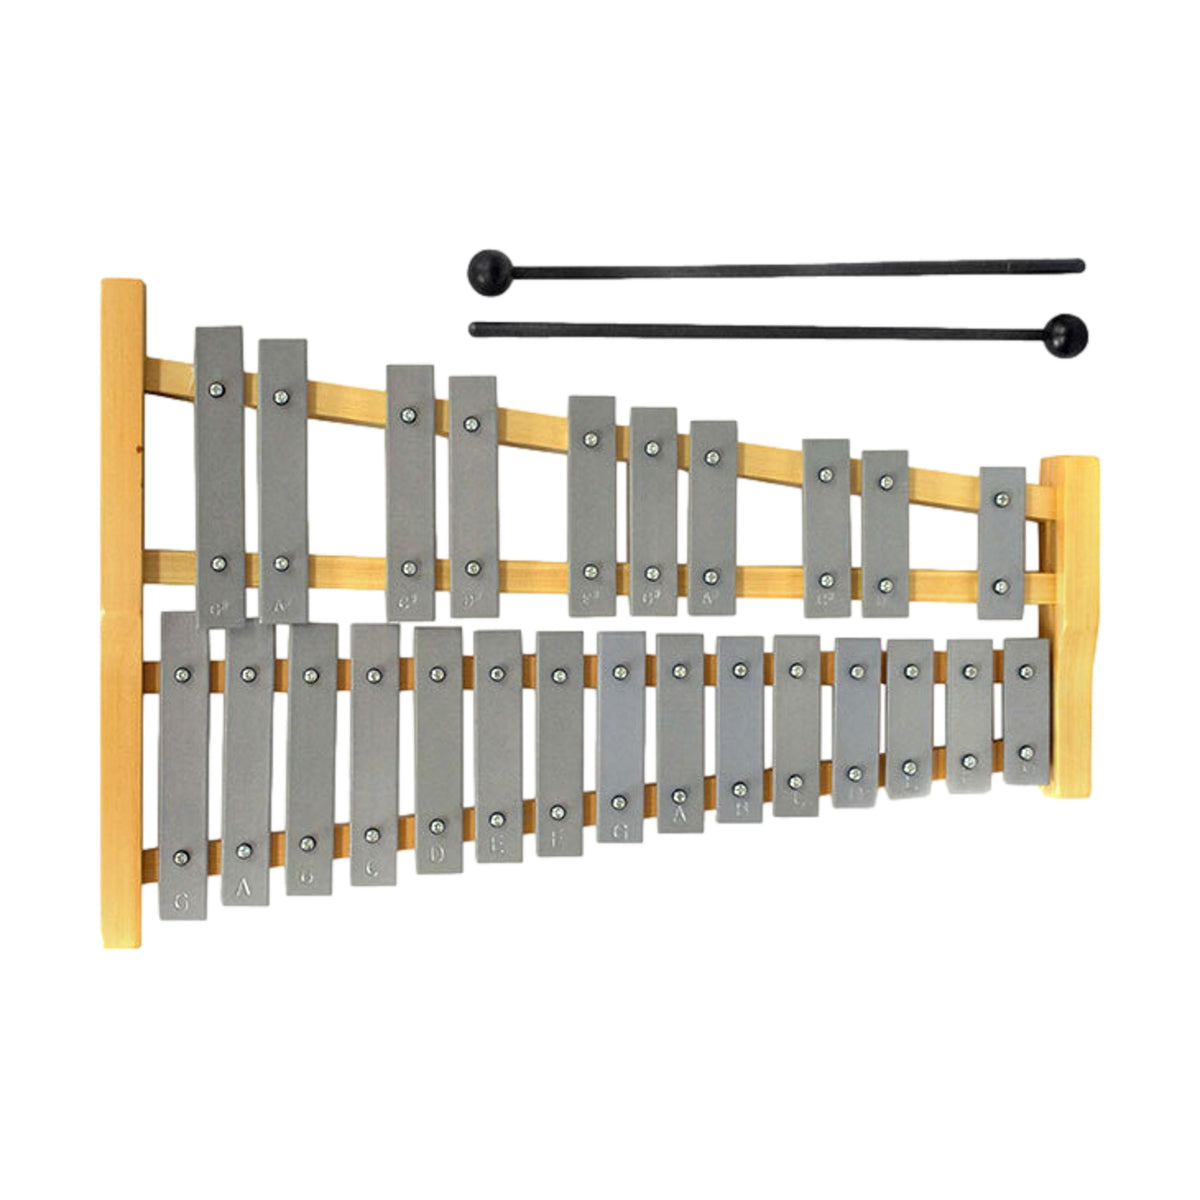 Percussion Plus 25 Note Glockenspiel with Natural Wood Frame